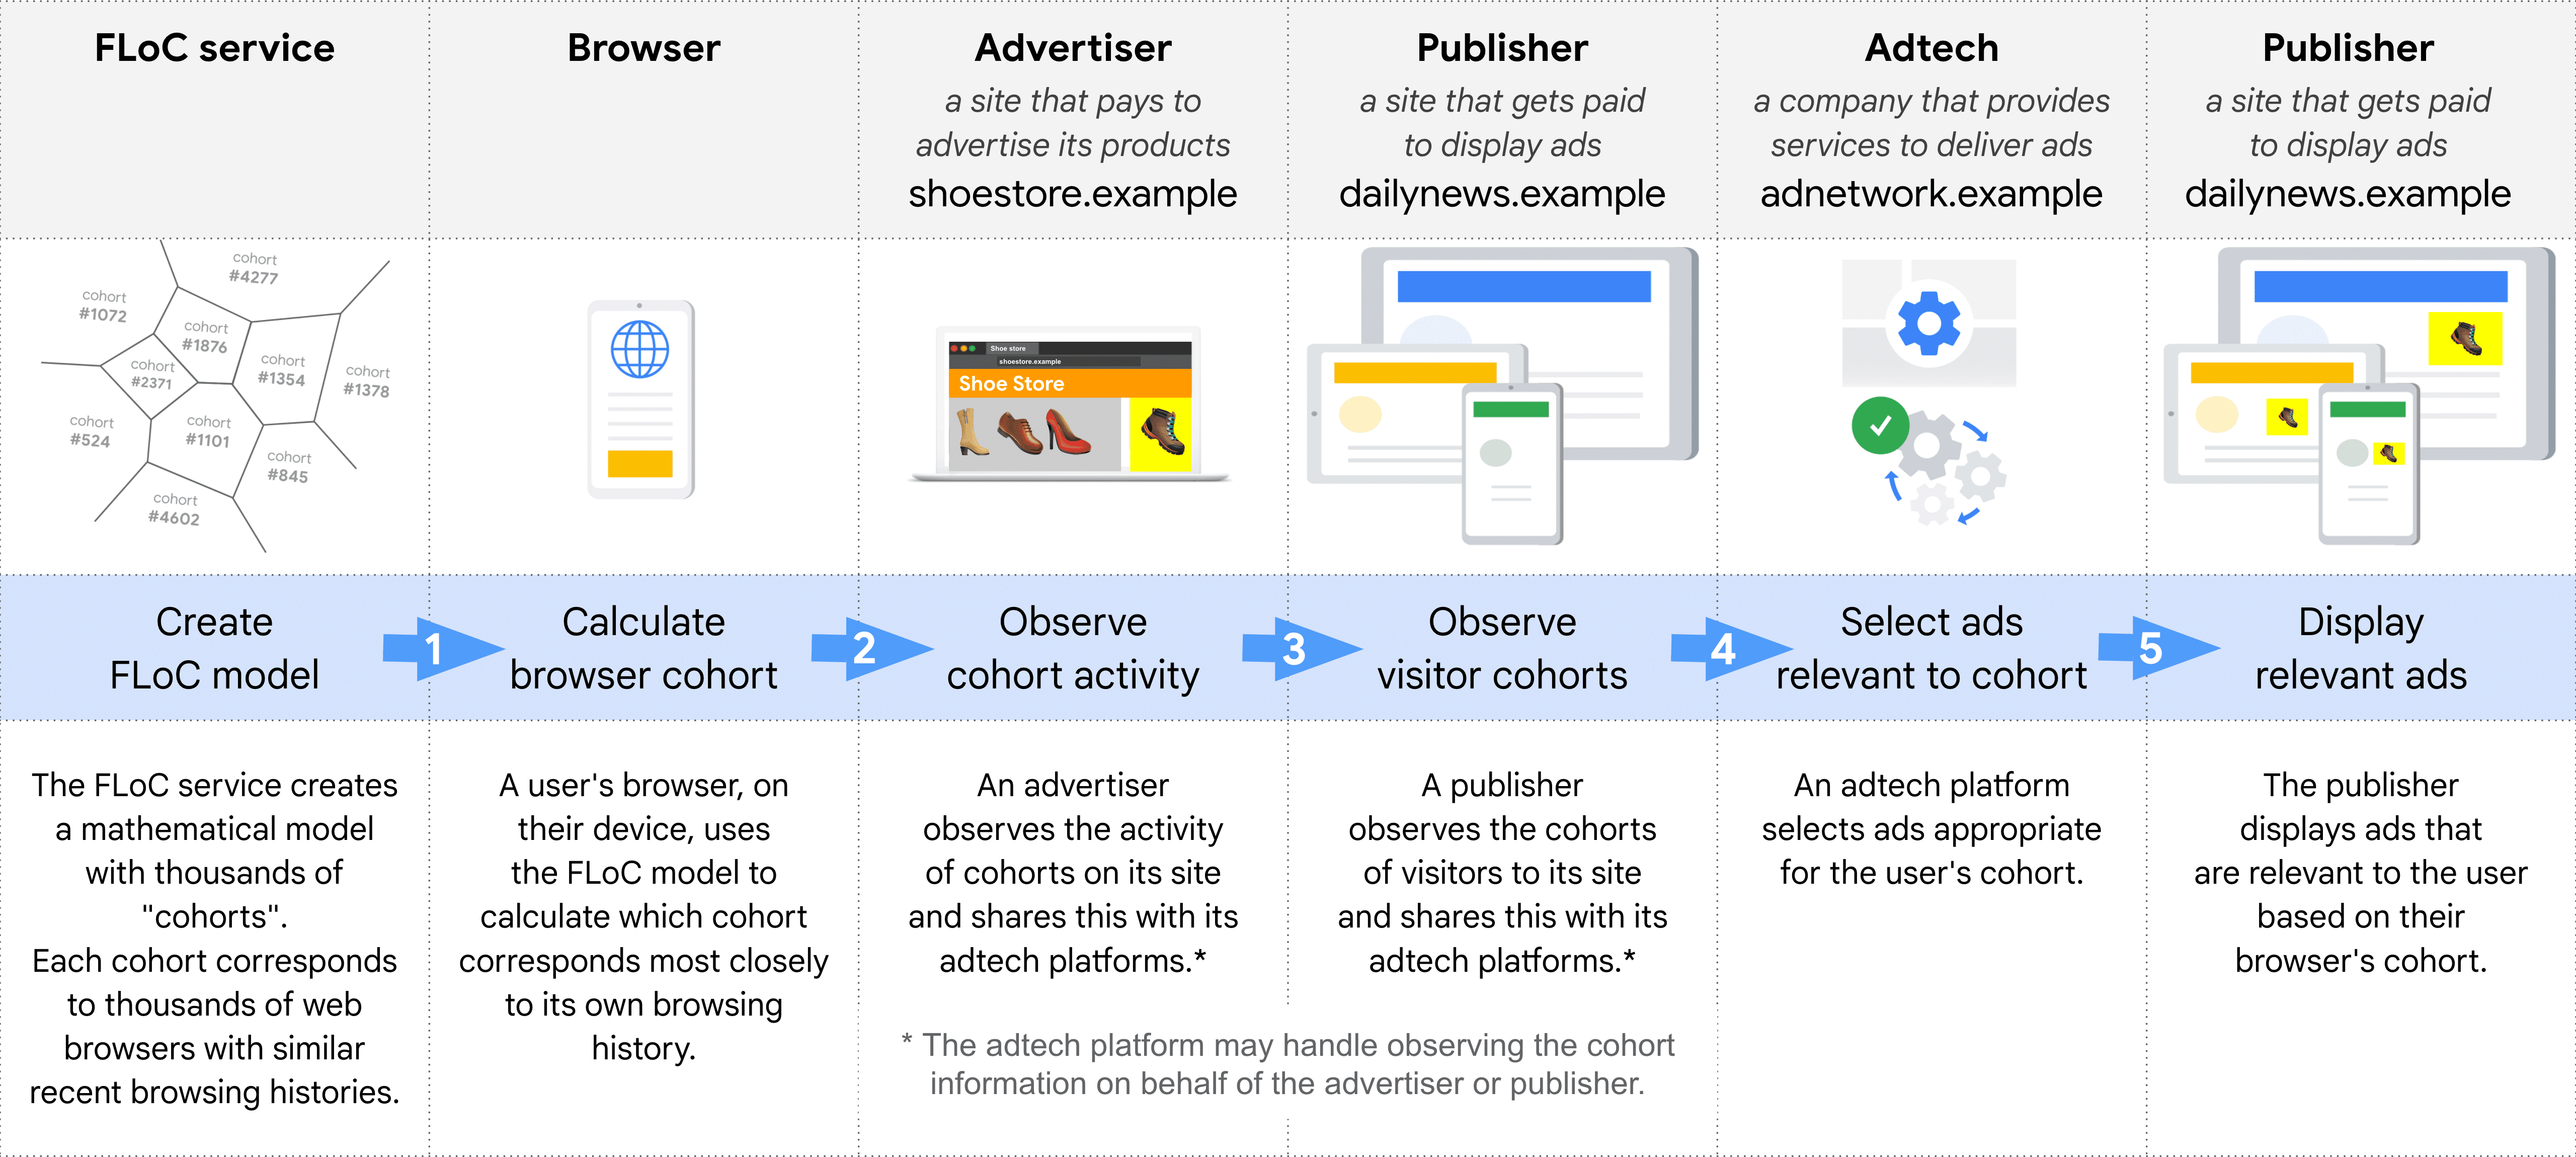 Diagram showing, step by step, the different roles in selecting and delivering an ad using
  FLoC: FLoC service, Browser, Advertisers, Publisher (to observe cohorts), Adtech,
  Publisher (to display ads)